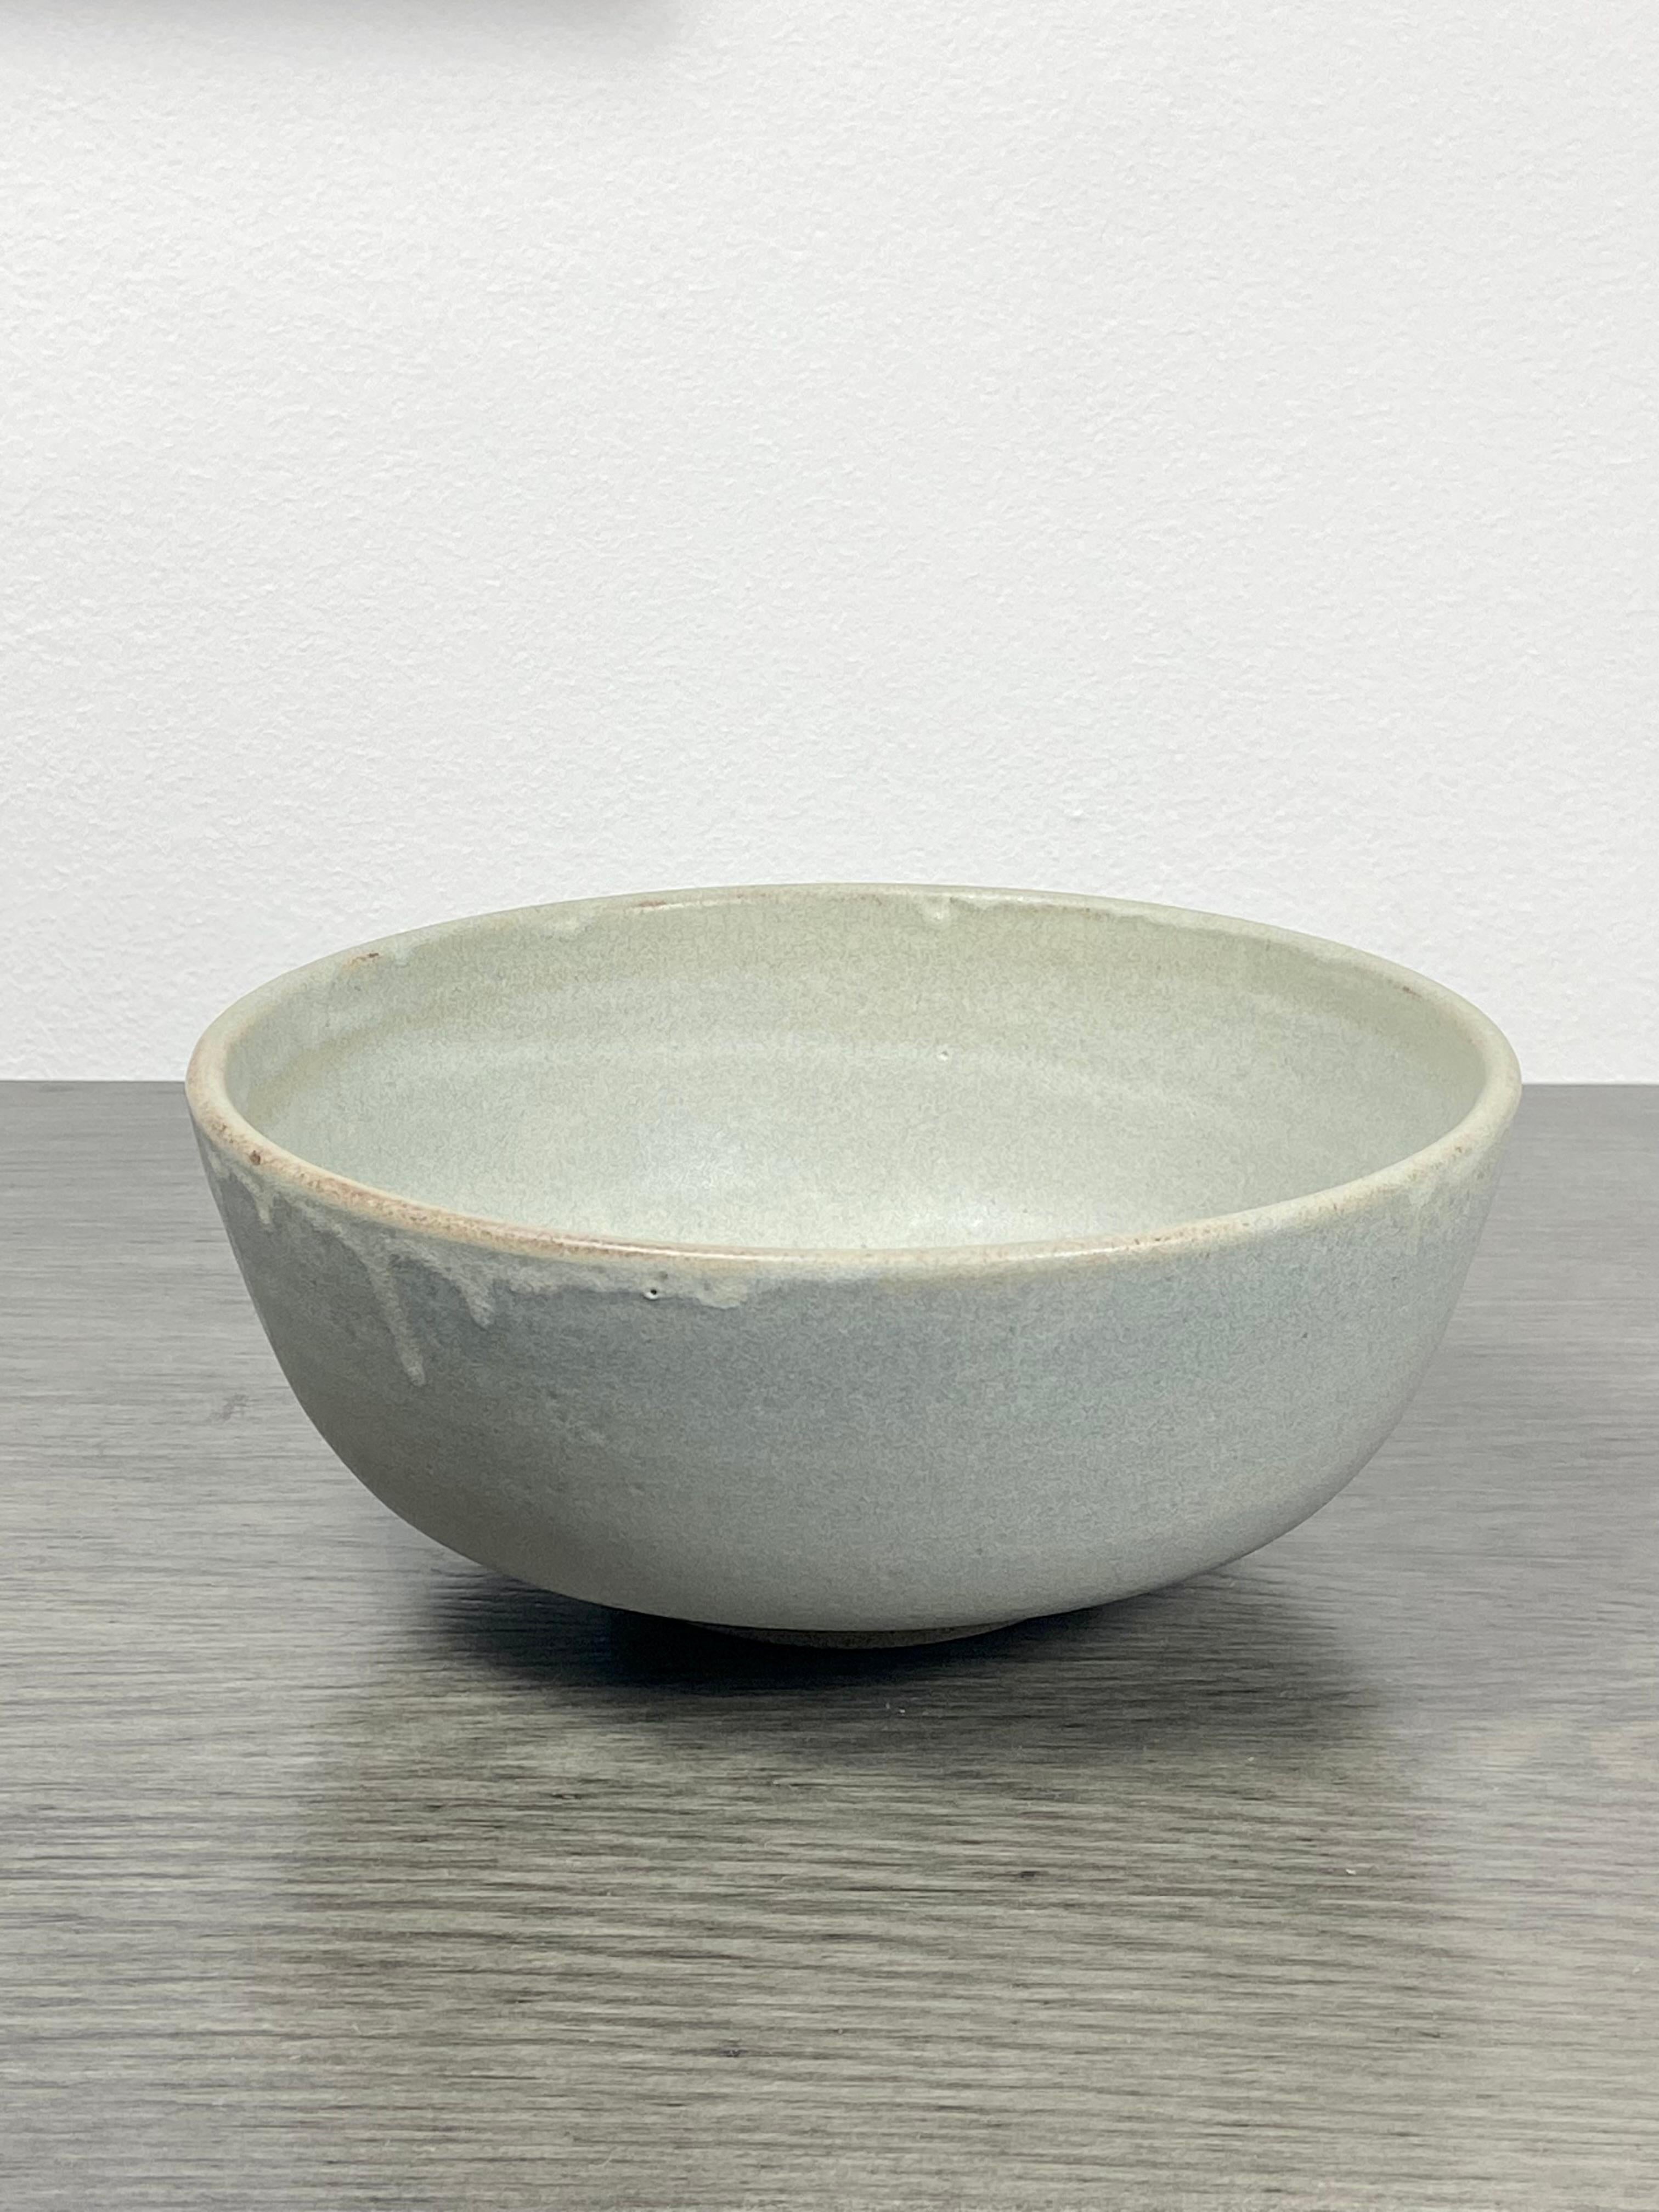 Hand-Crafted Celadon Ceramic Bowl With Drip Glaze For Sale